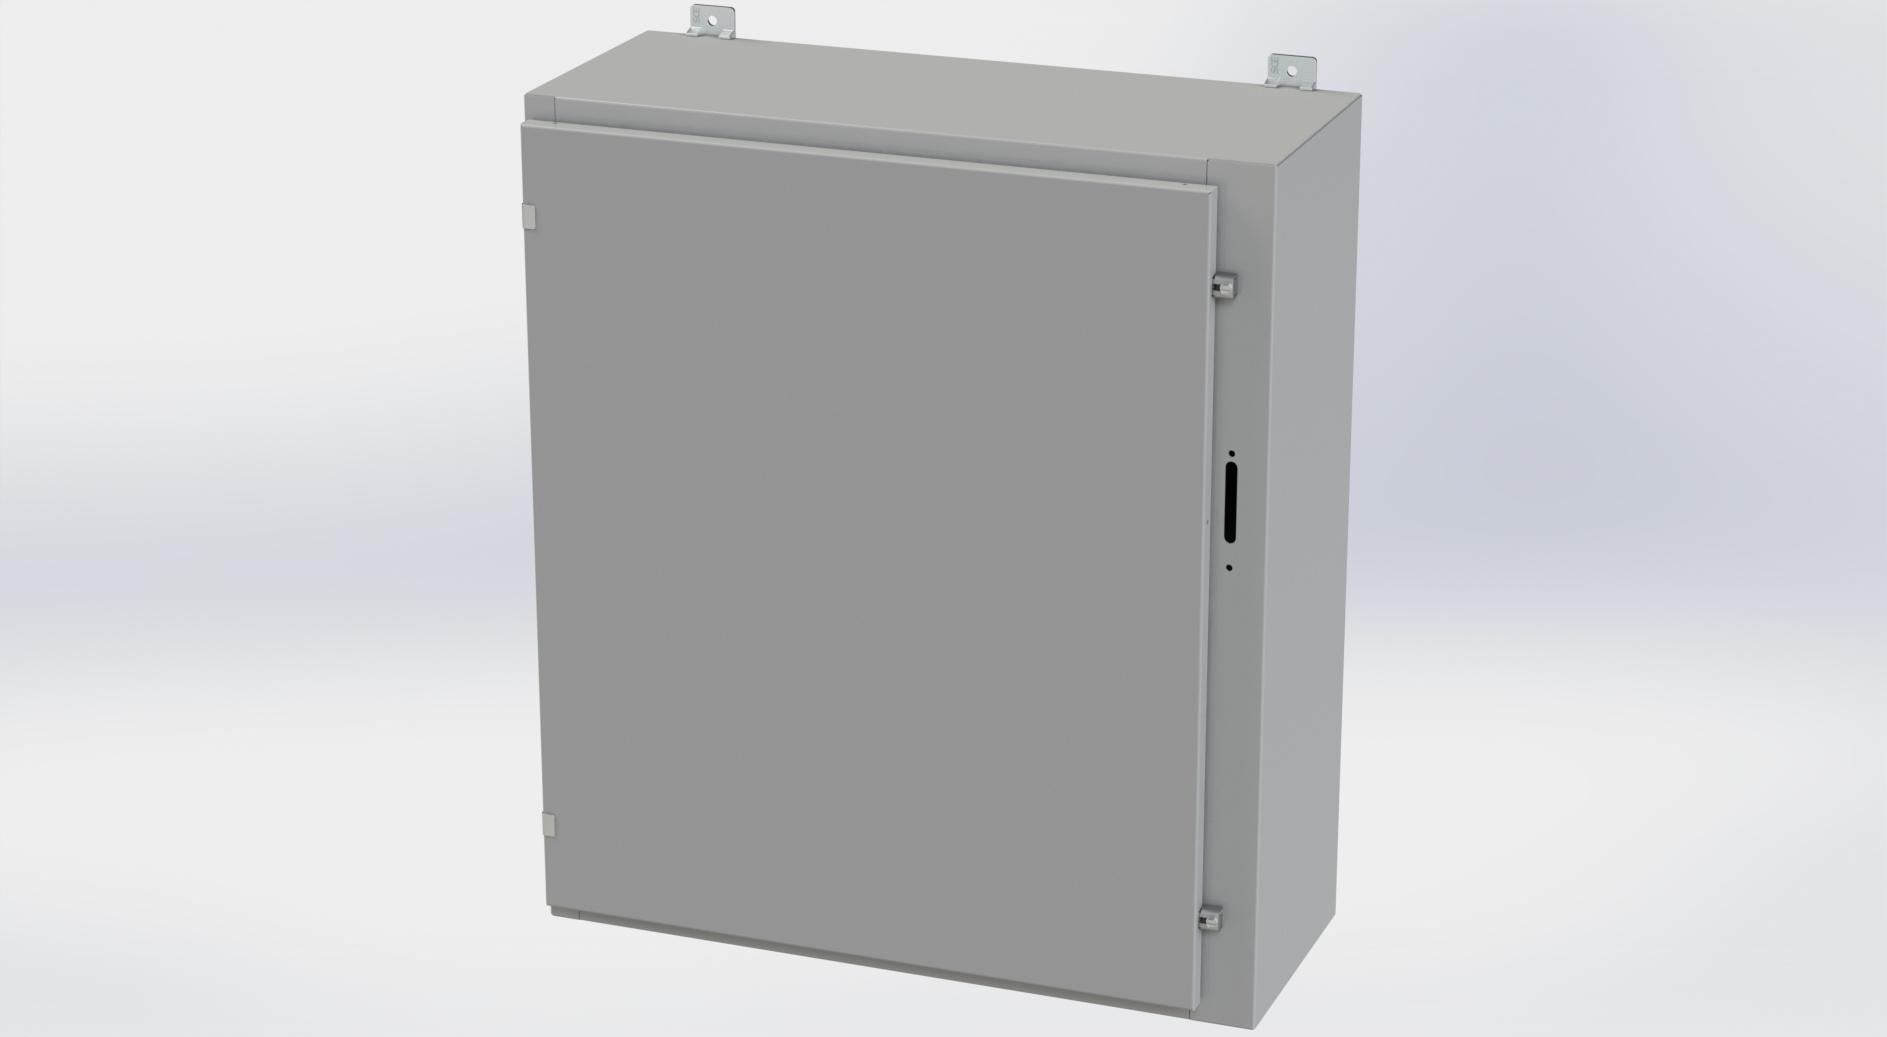 Saginaw Control SCE-36HS3112LP HS LP Enclosure, Height:36.00", Width:31.38", Depth:12.00", ANSI-61 gray powder coating inside and out. Optional sub-panels are powder coated white.